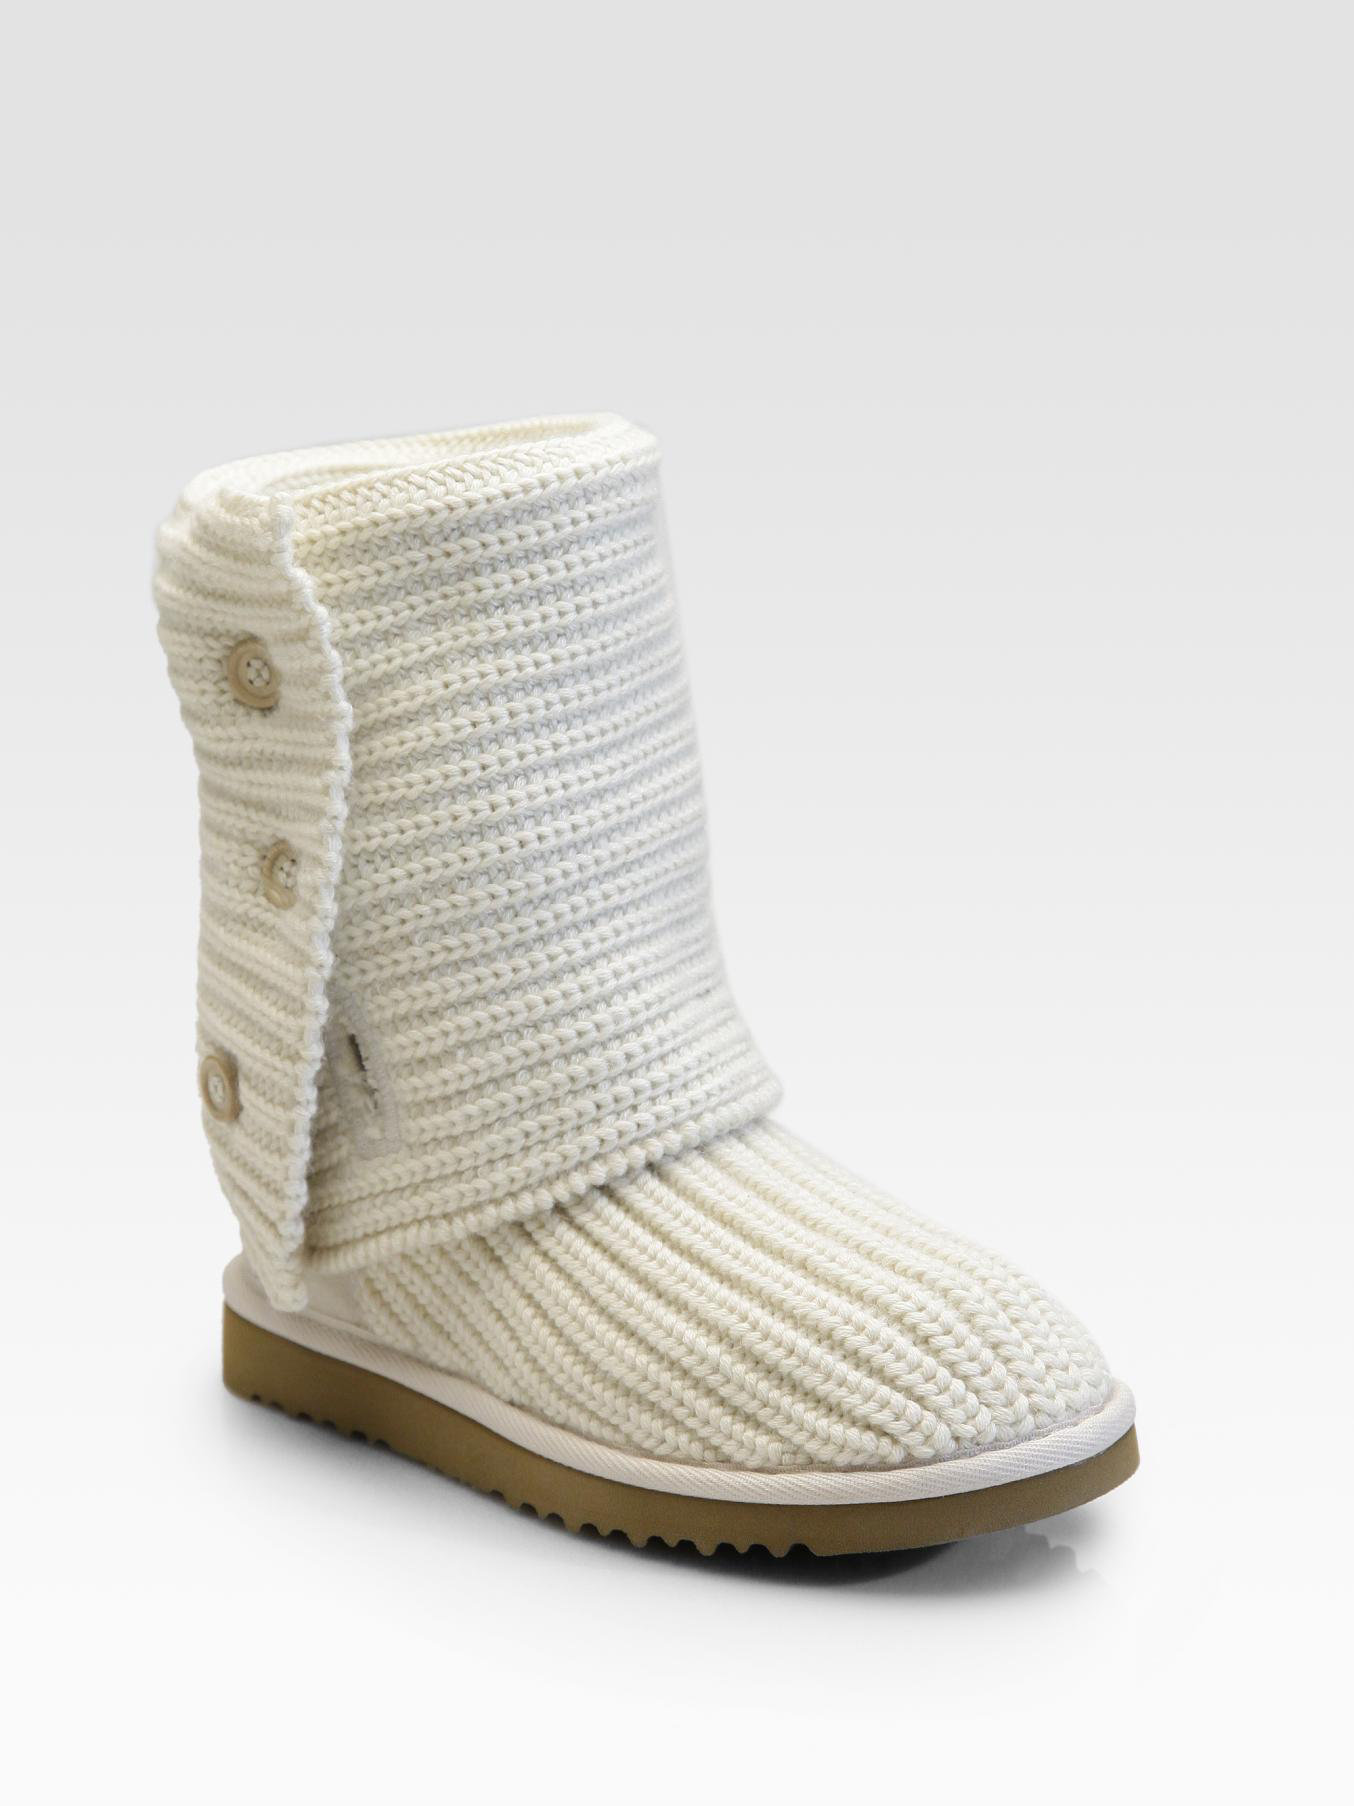 uggs cardy boots